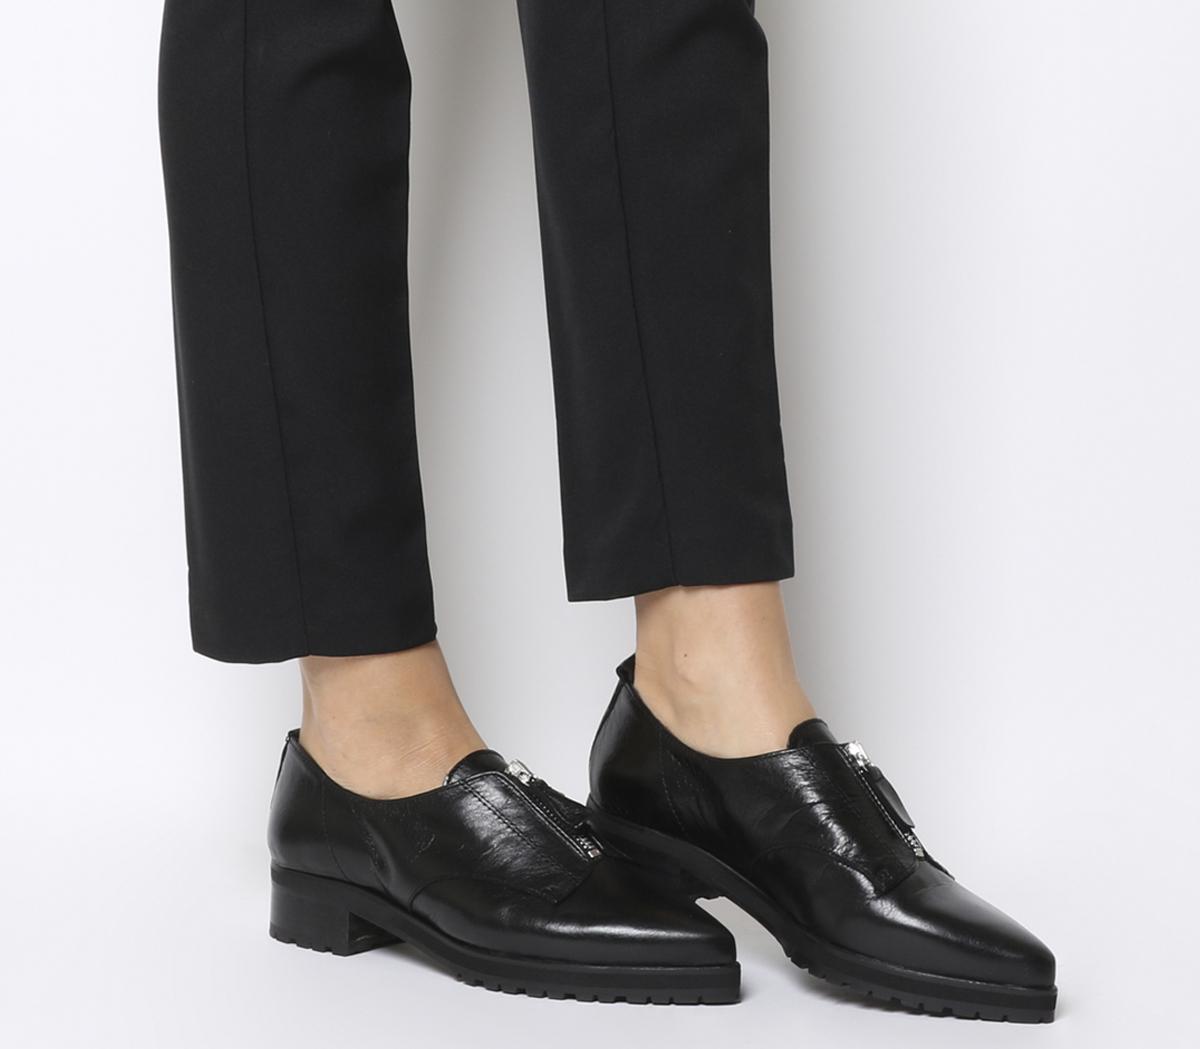 OFFICEFoster Zip Front Cleated ShoesBlack Leather